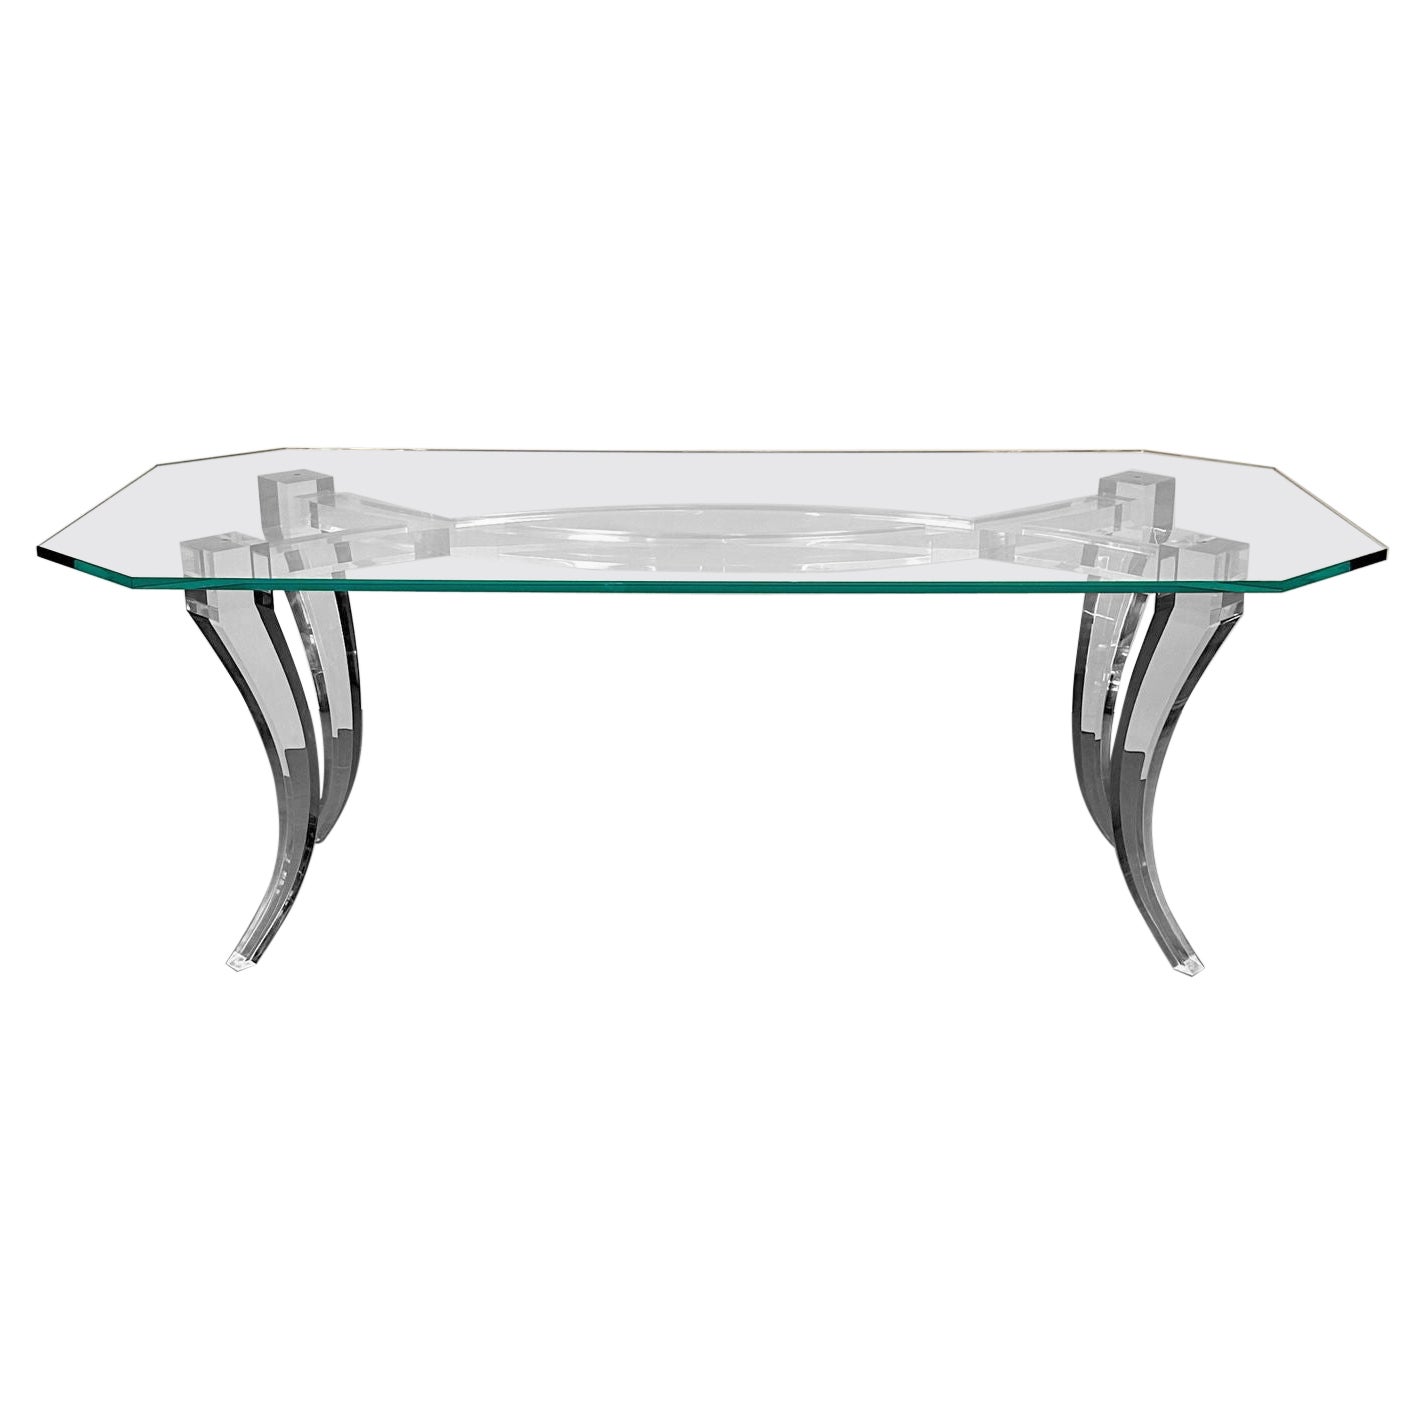 Modern Lucite and Glass Dining / Kitchen Table, American Designer, 2000s For Sale